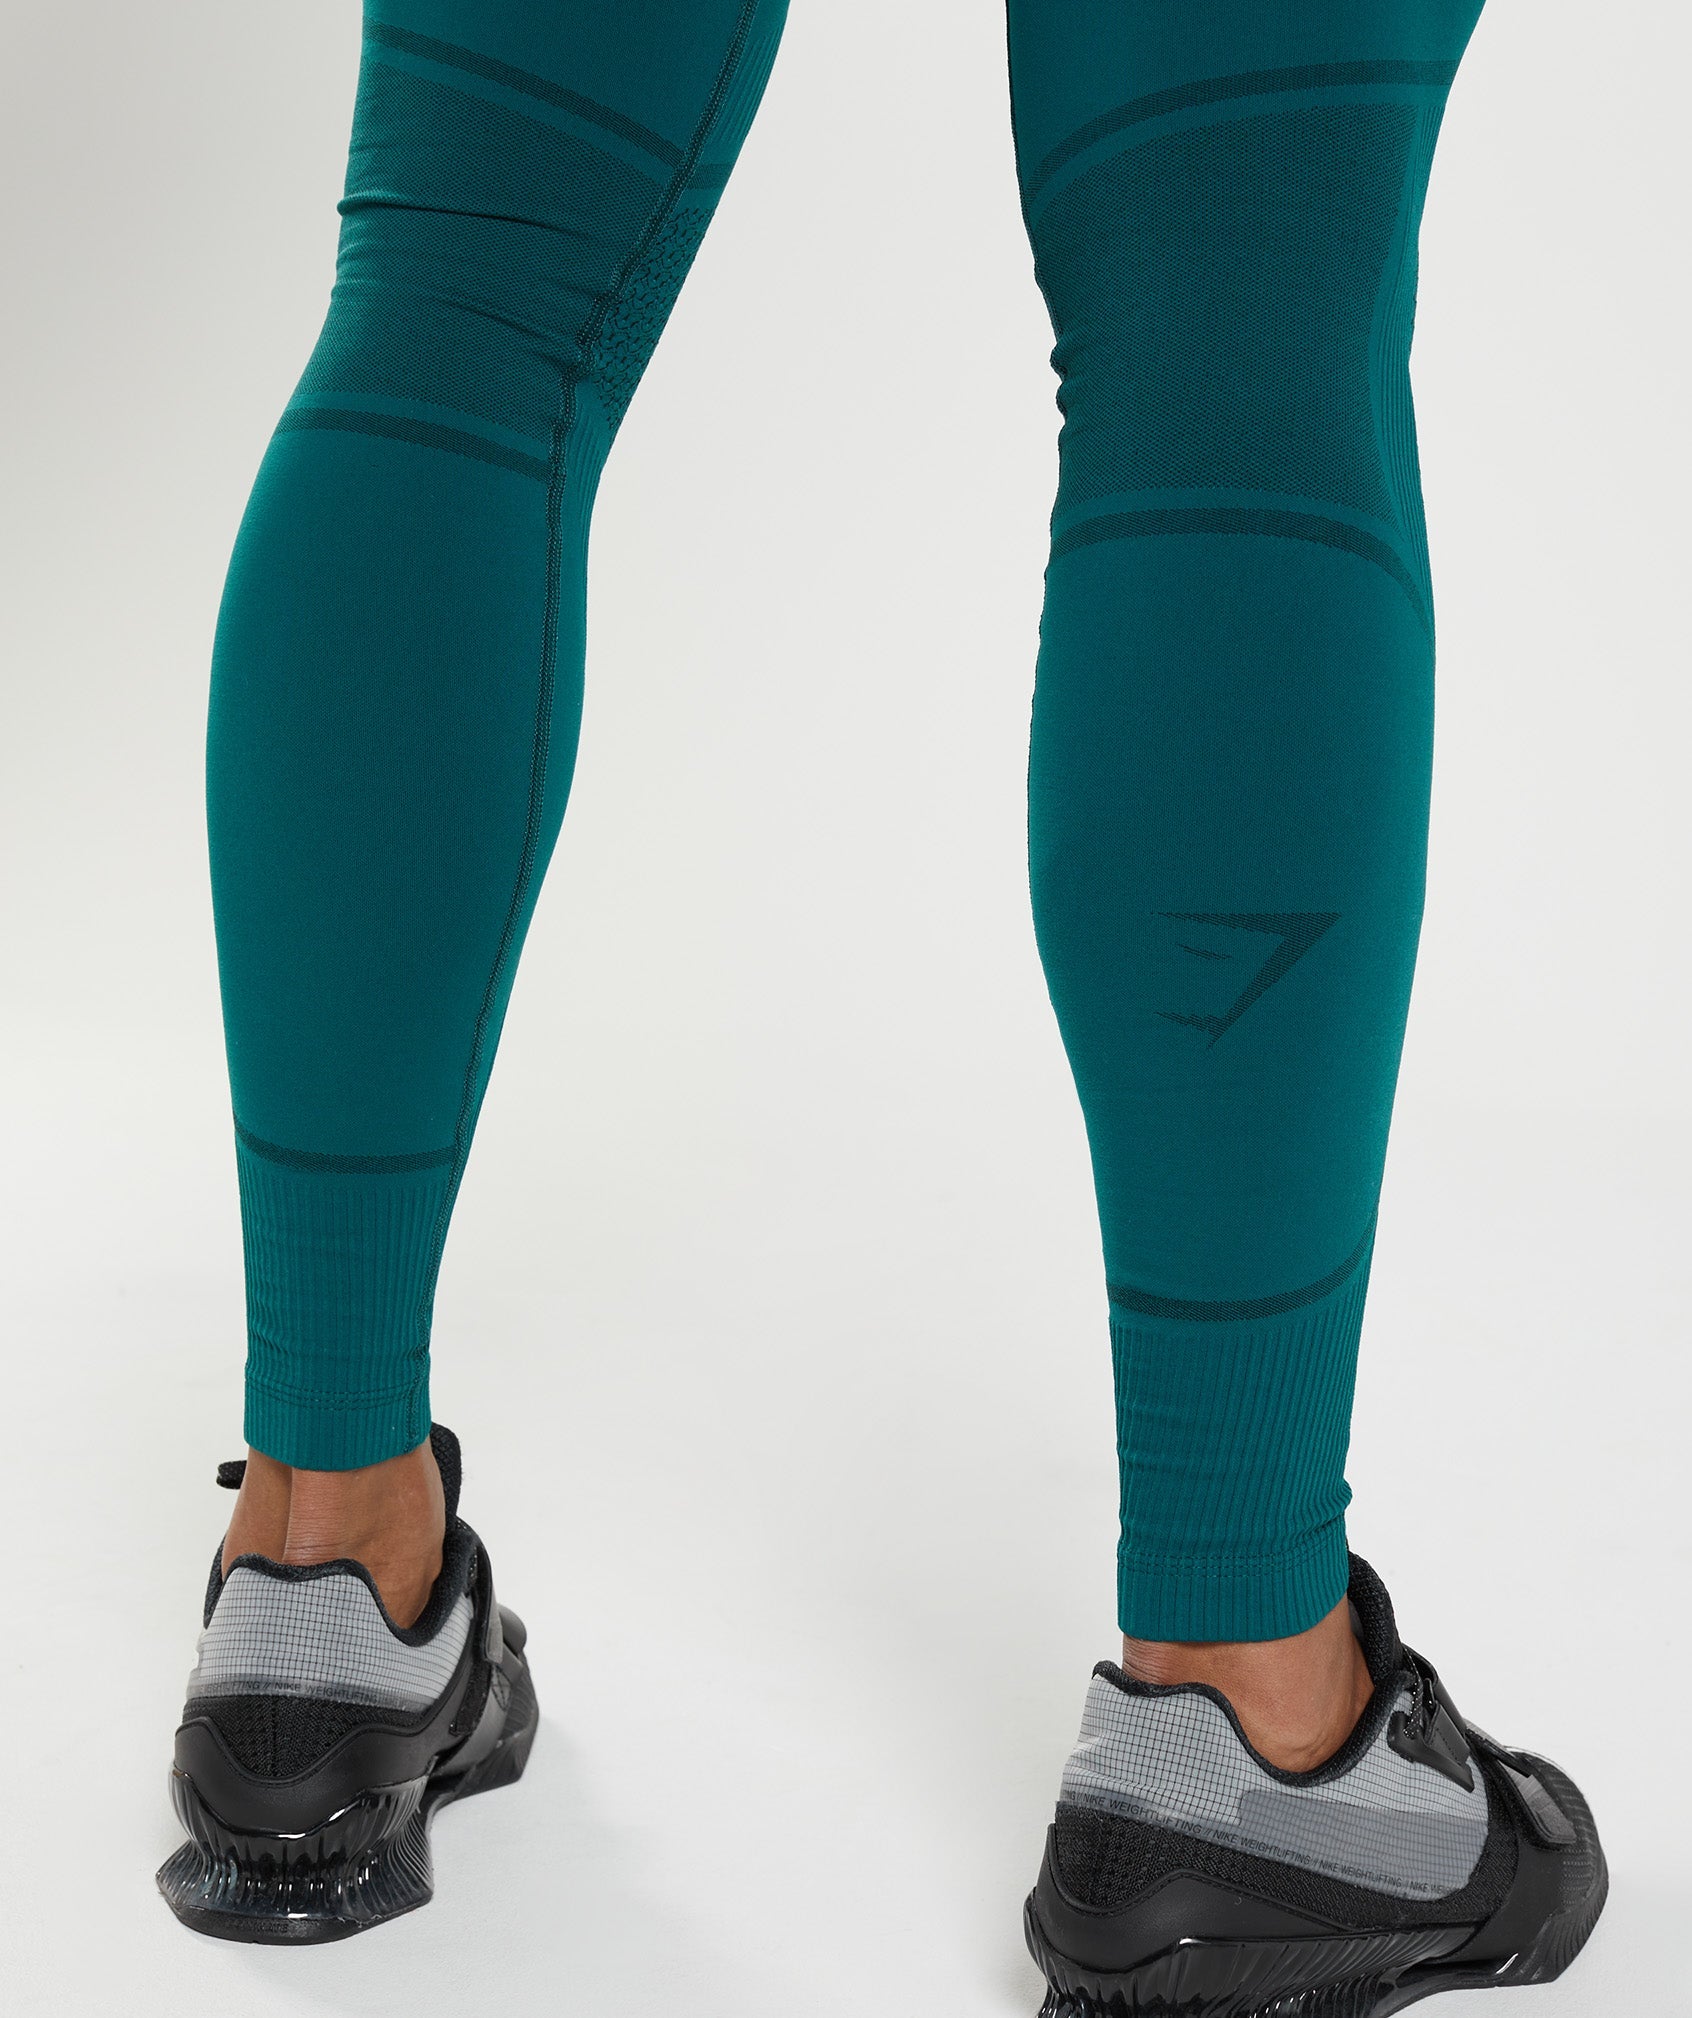 315 Seamless Tights in Winter Teal/Black - view 6